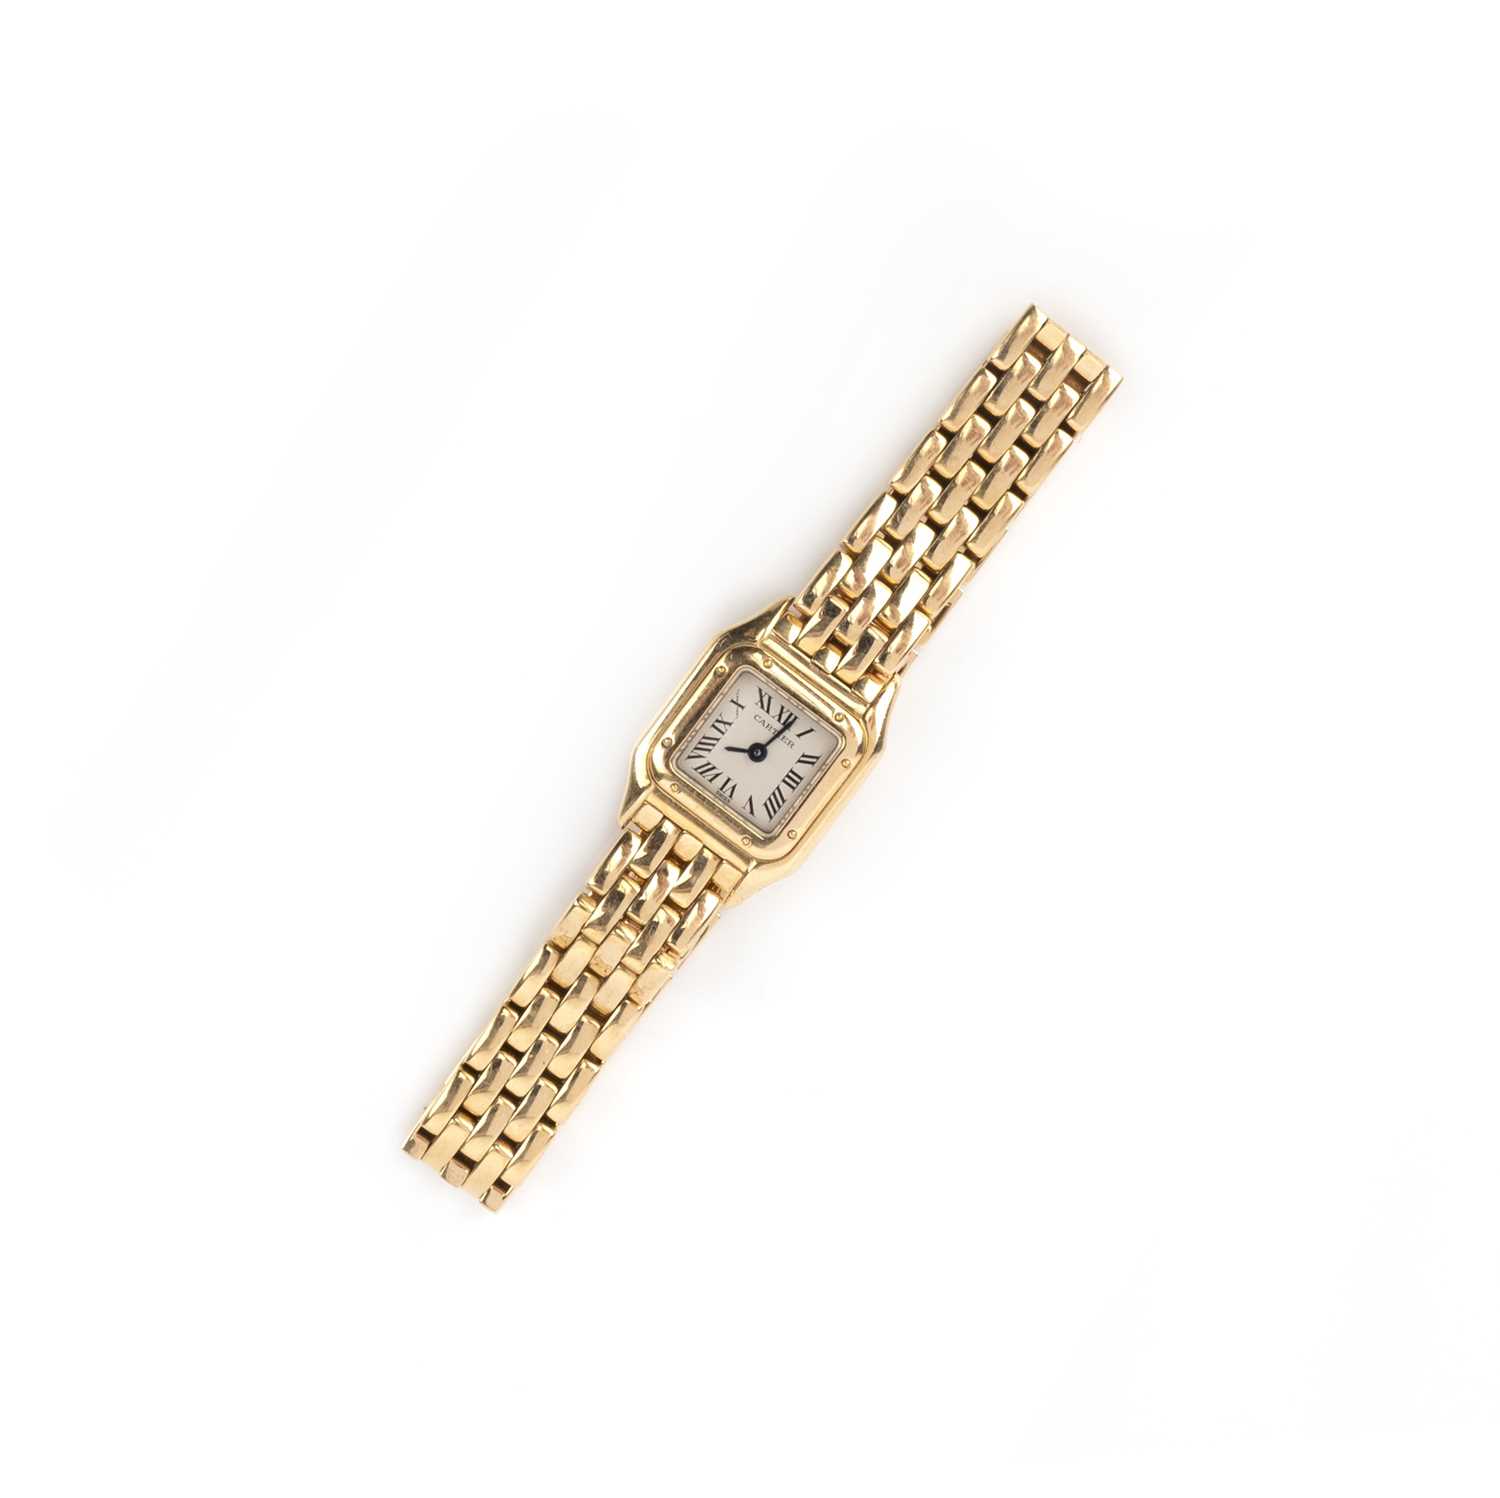 Cartier, a lady's gold wristwatch, 'Mini Panthère' ref. 1130, the square dial in cream enamel with - Image 2 of 2